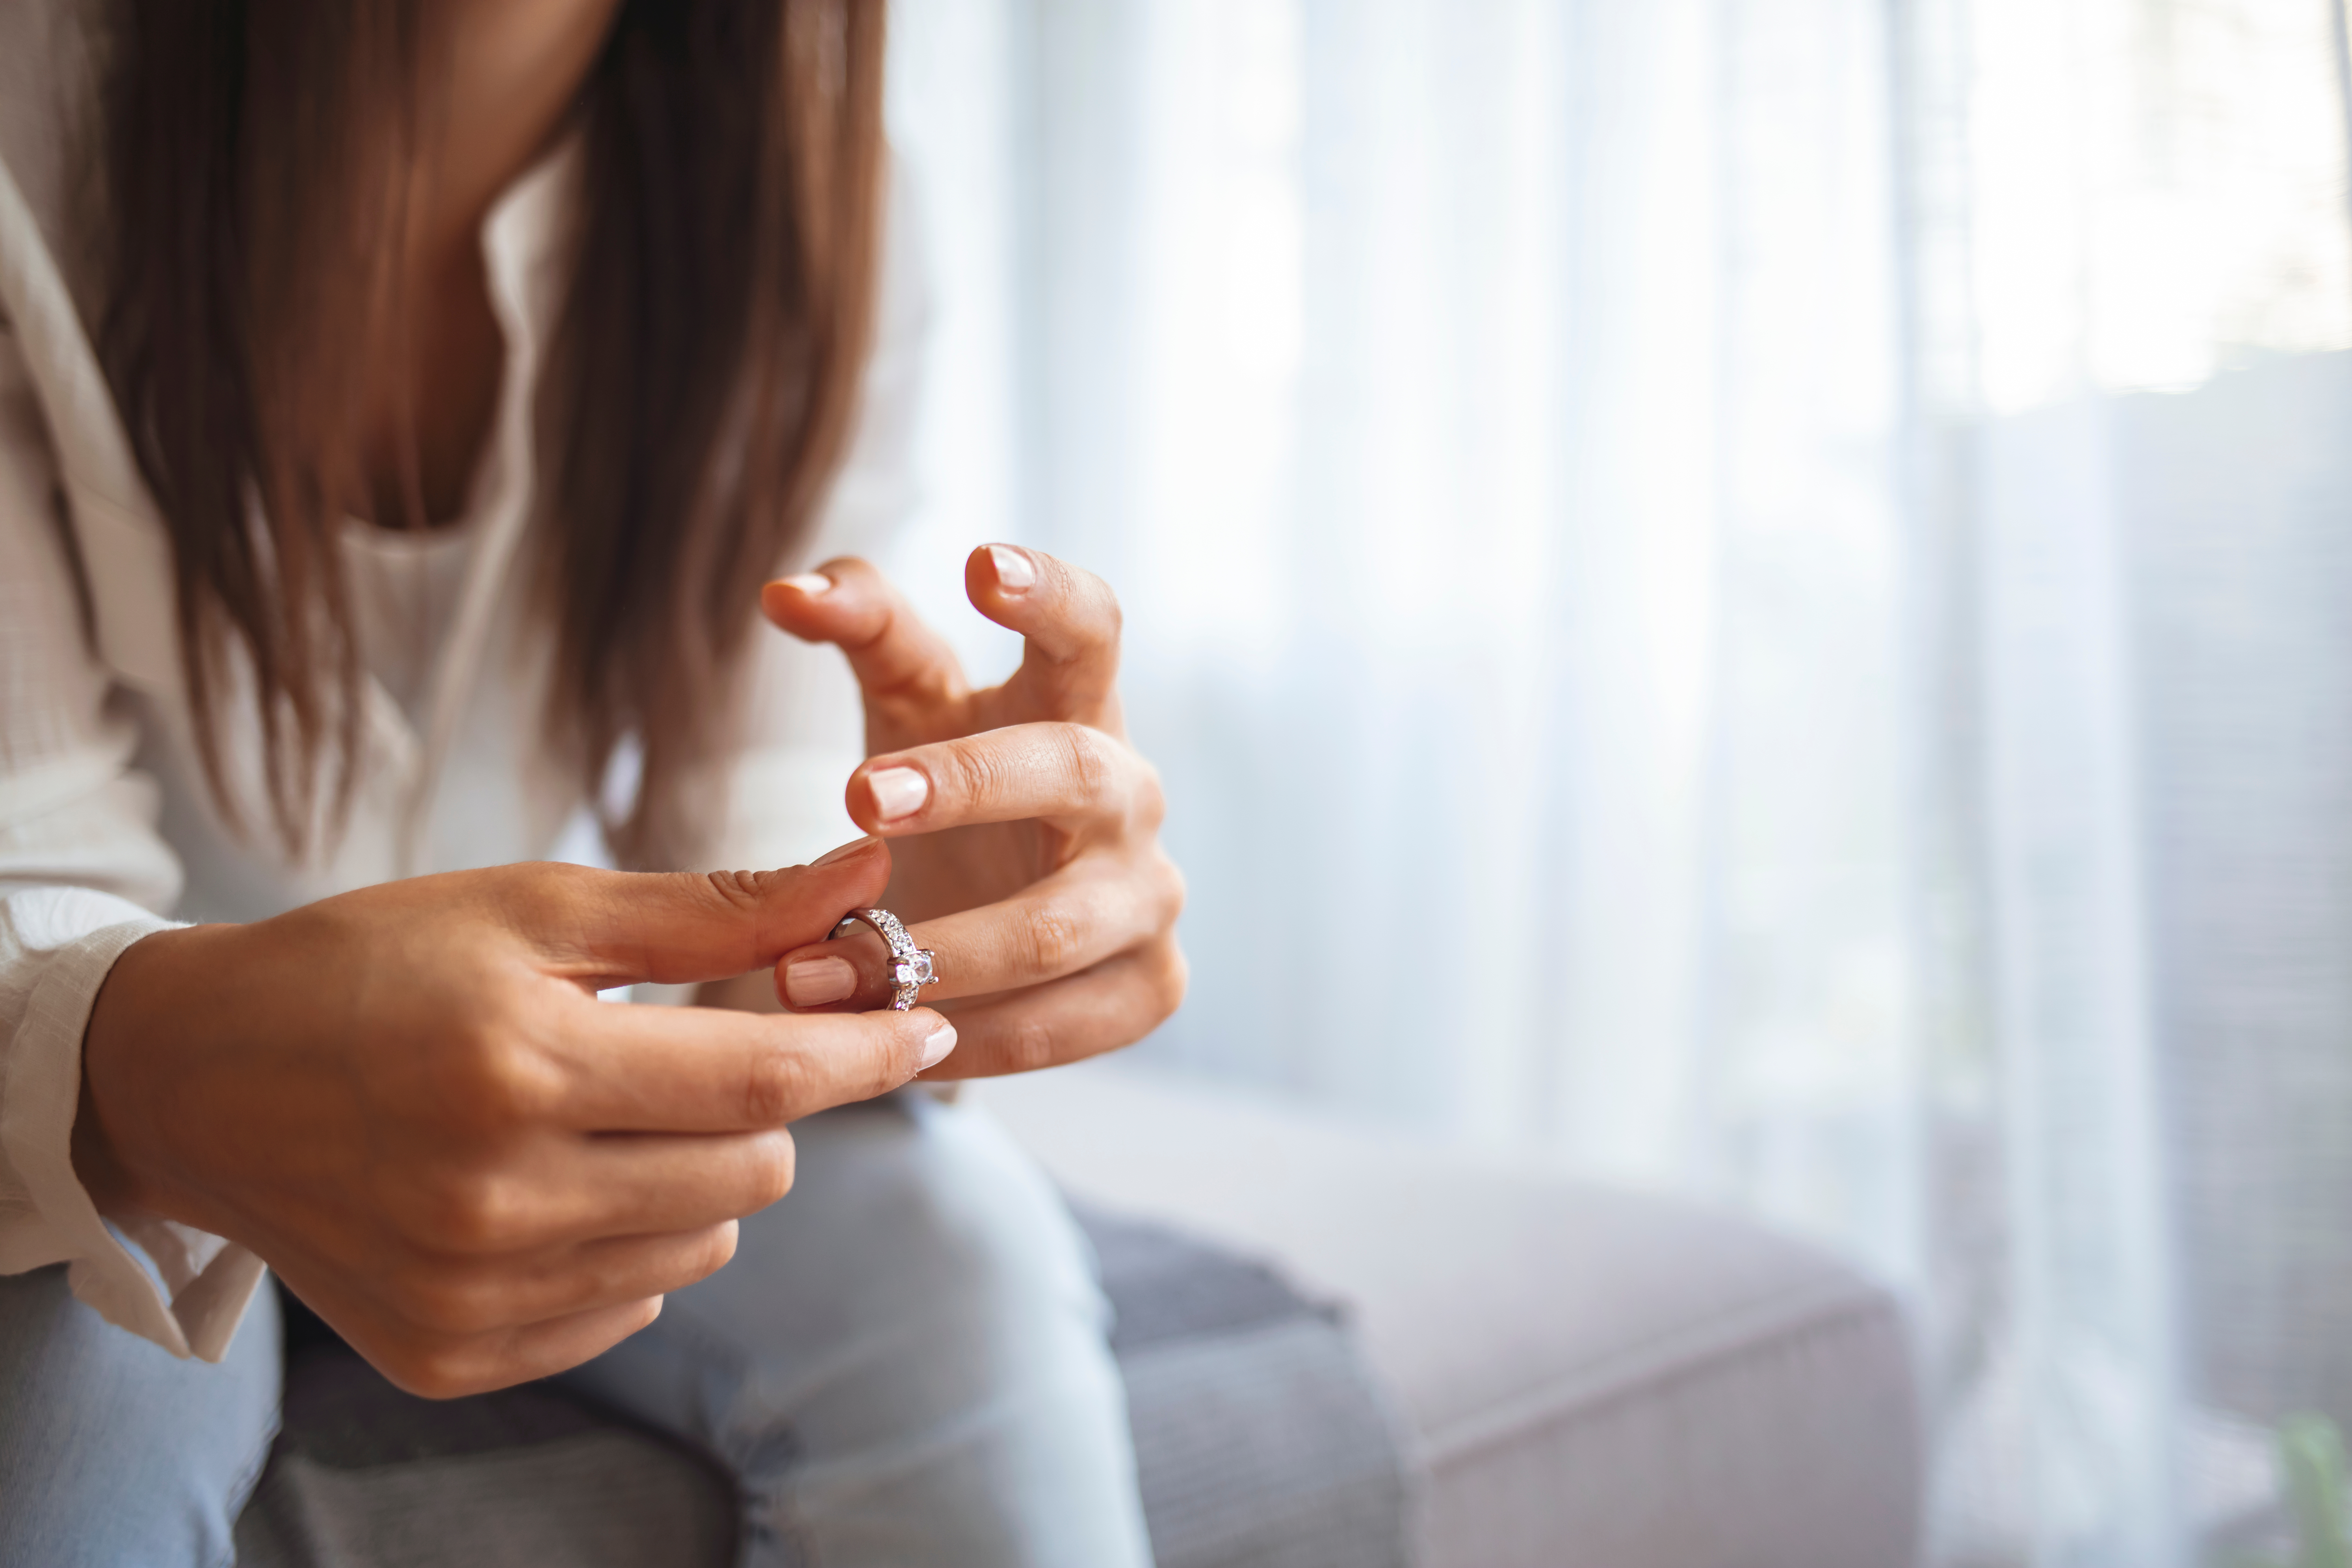 A depressed young woman holding her wedding ring | Source: Shutterstock